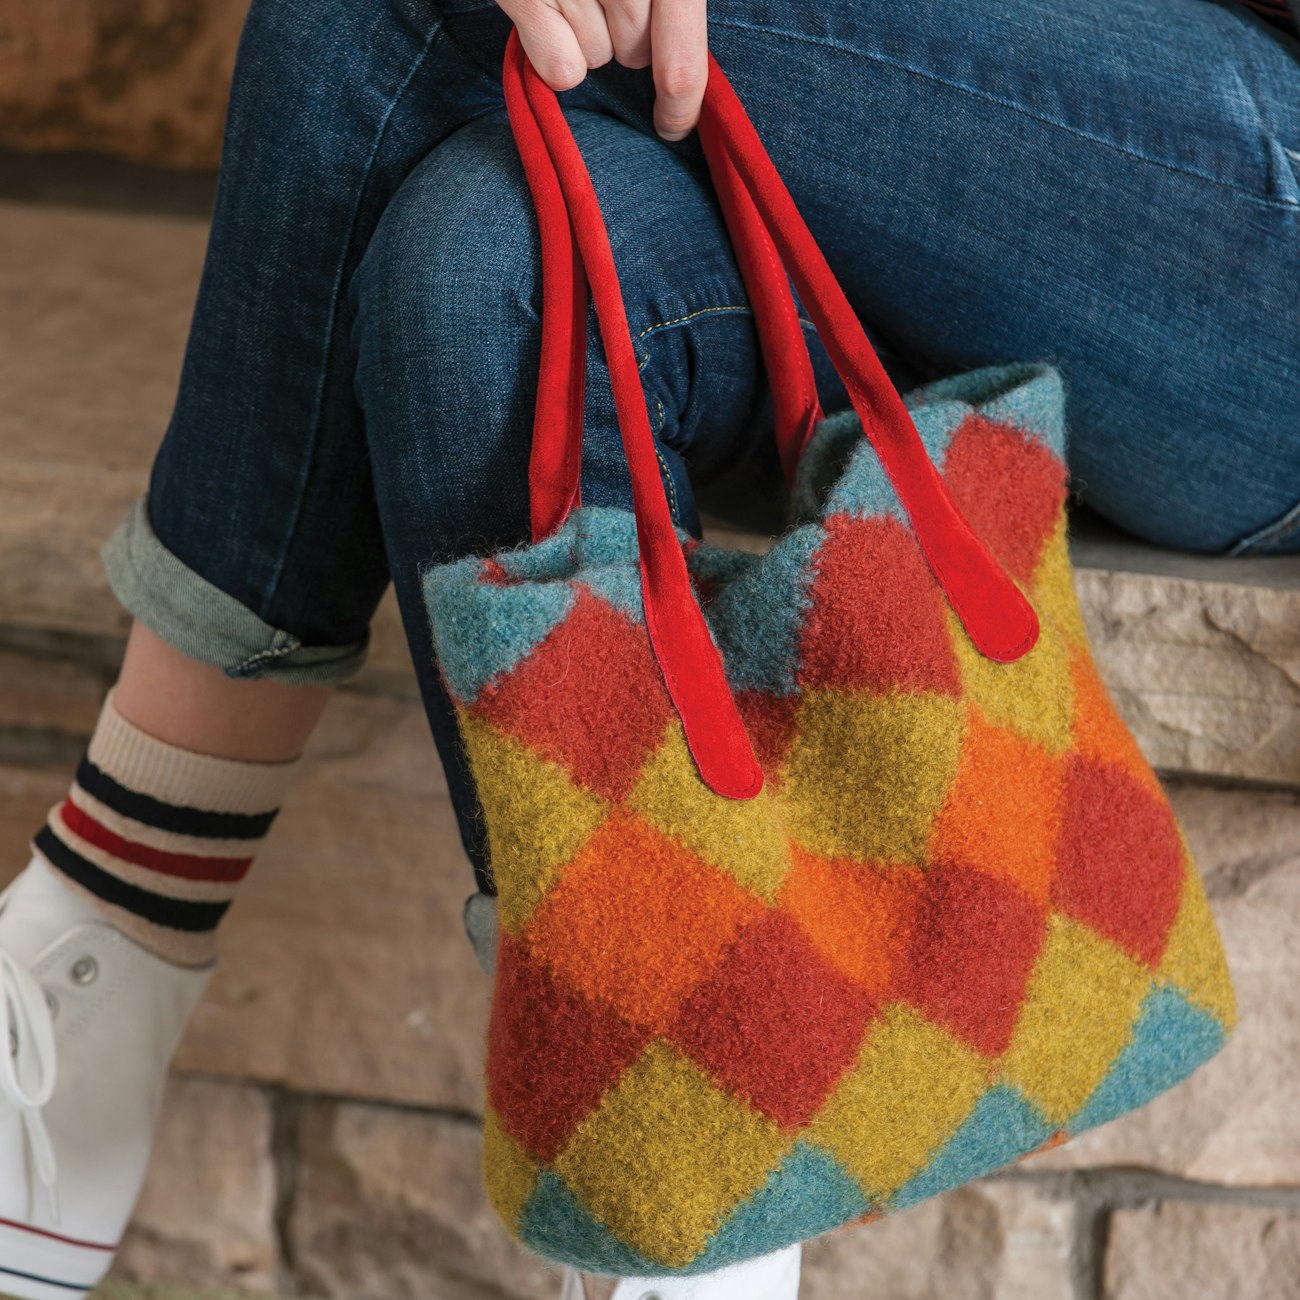 Diamond Tote by Deborah Shelmidine, Woven by Melissa Hankens from Little Looms 2016. Photography for this issue by Joe Coca and Ann Swanson